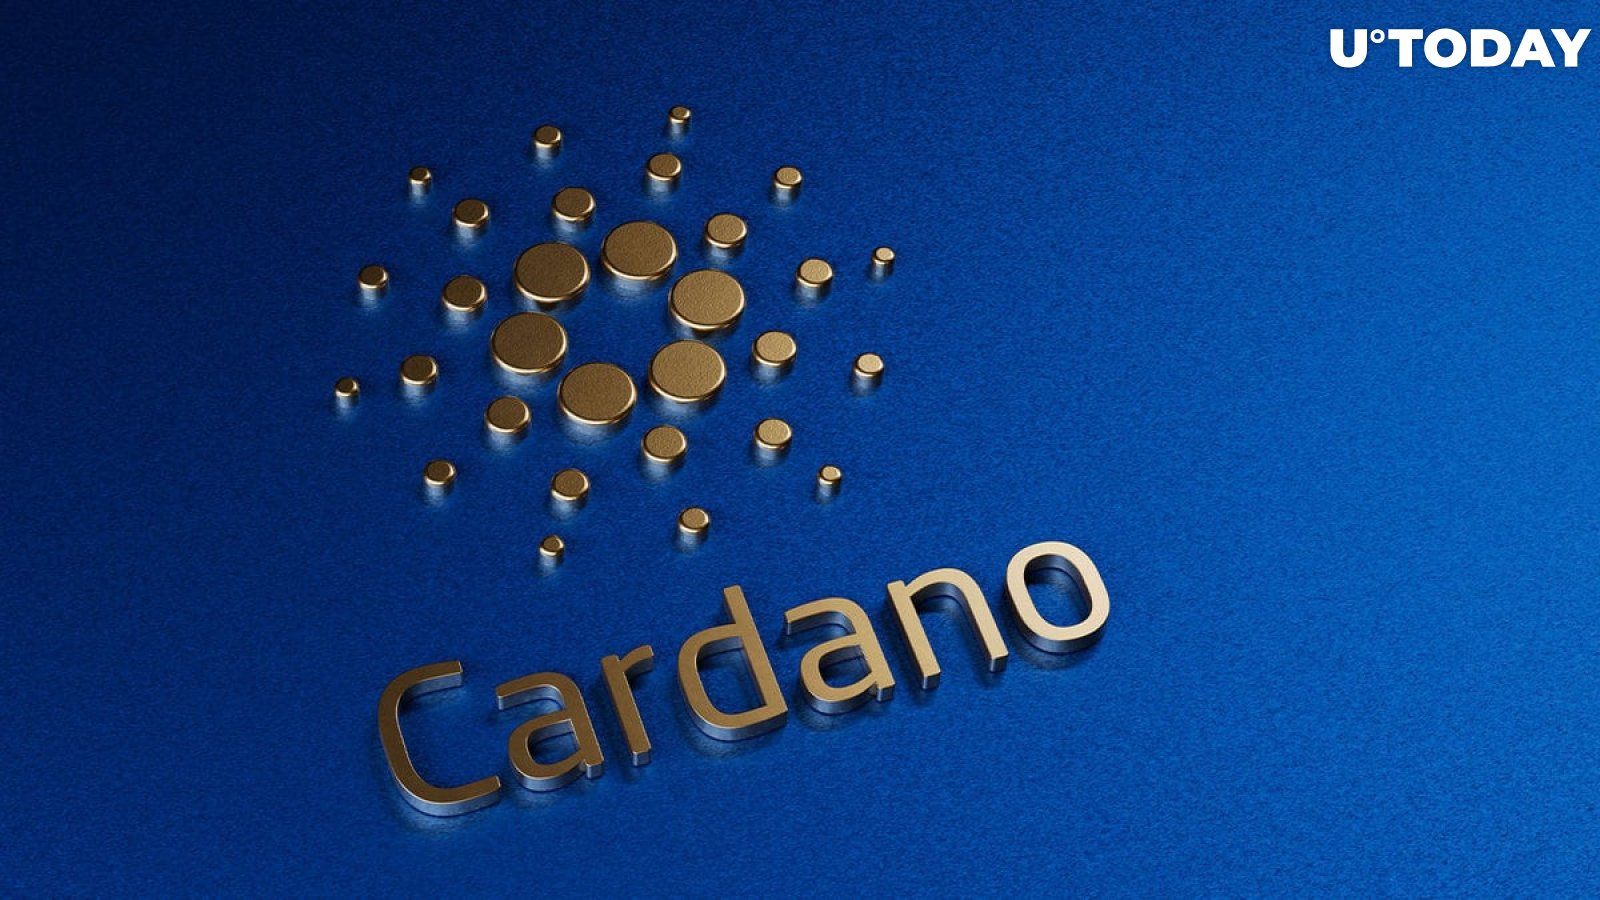 Cardano (ADA) Support Finally Goes Live for LimeWire's Public Token Sale